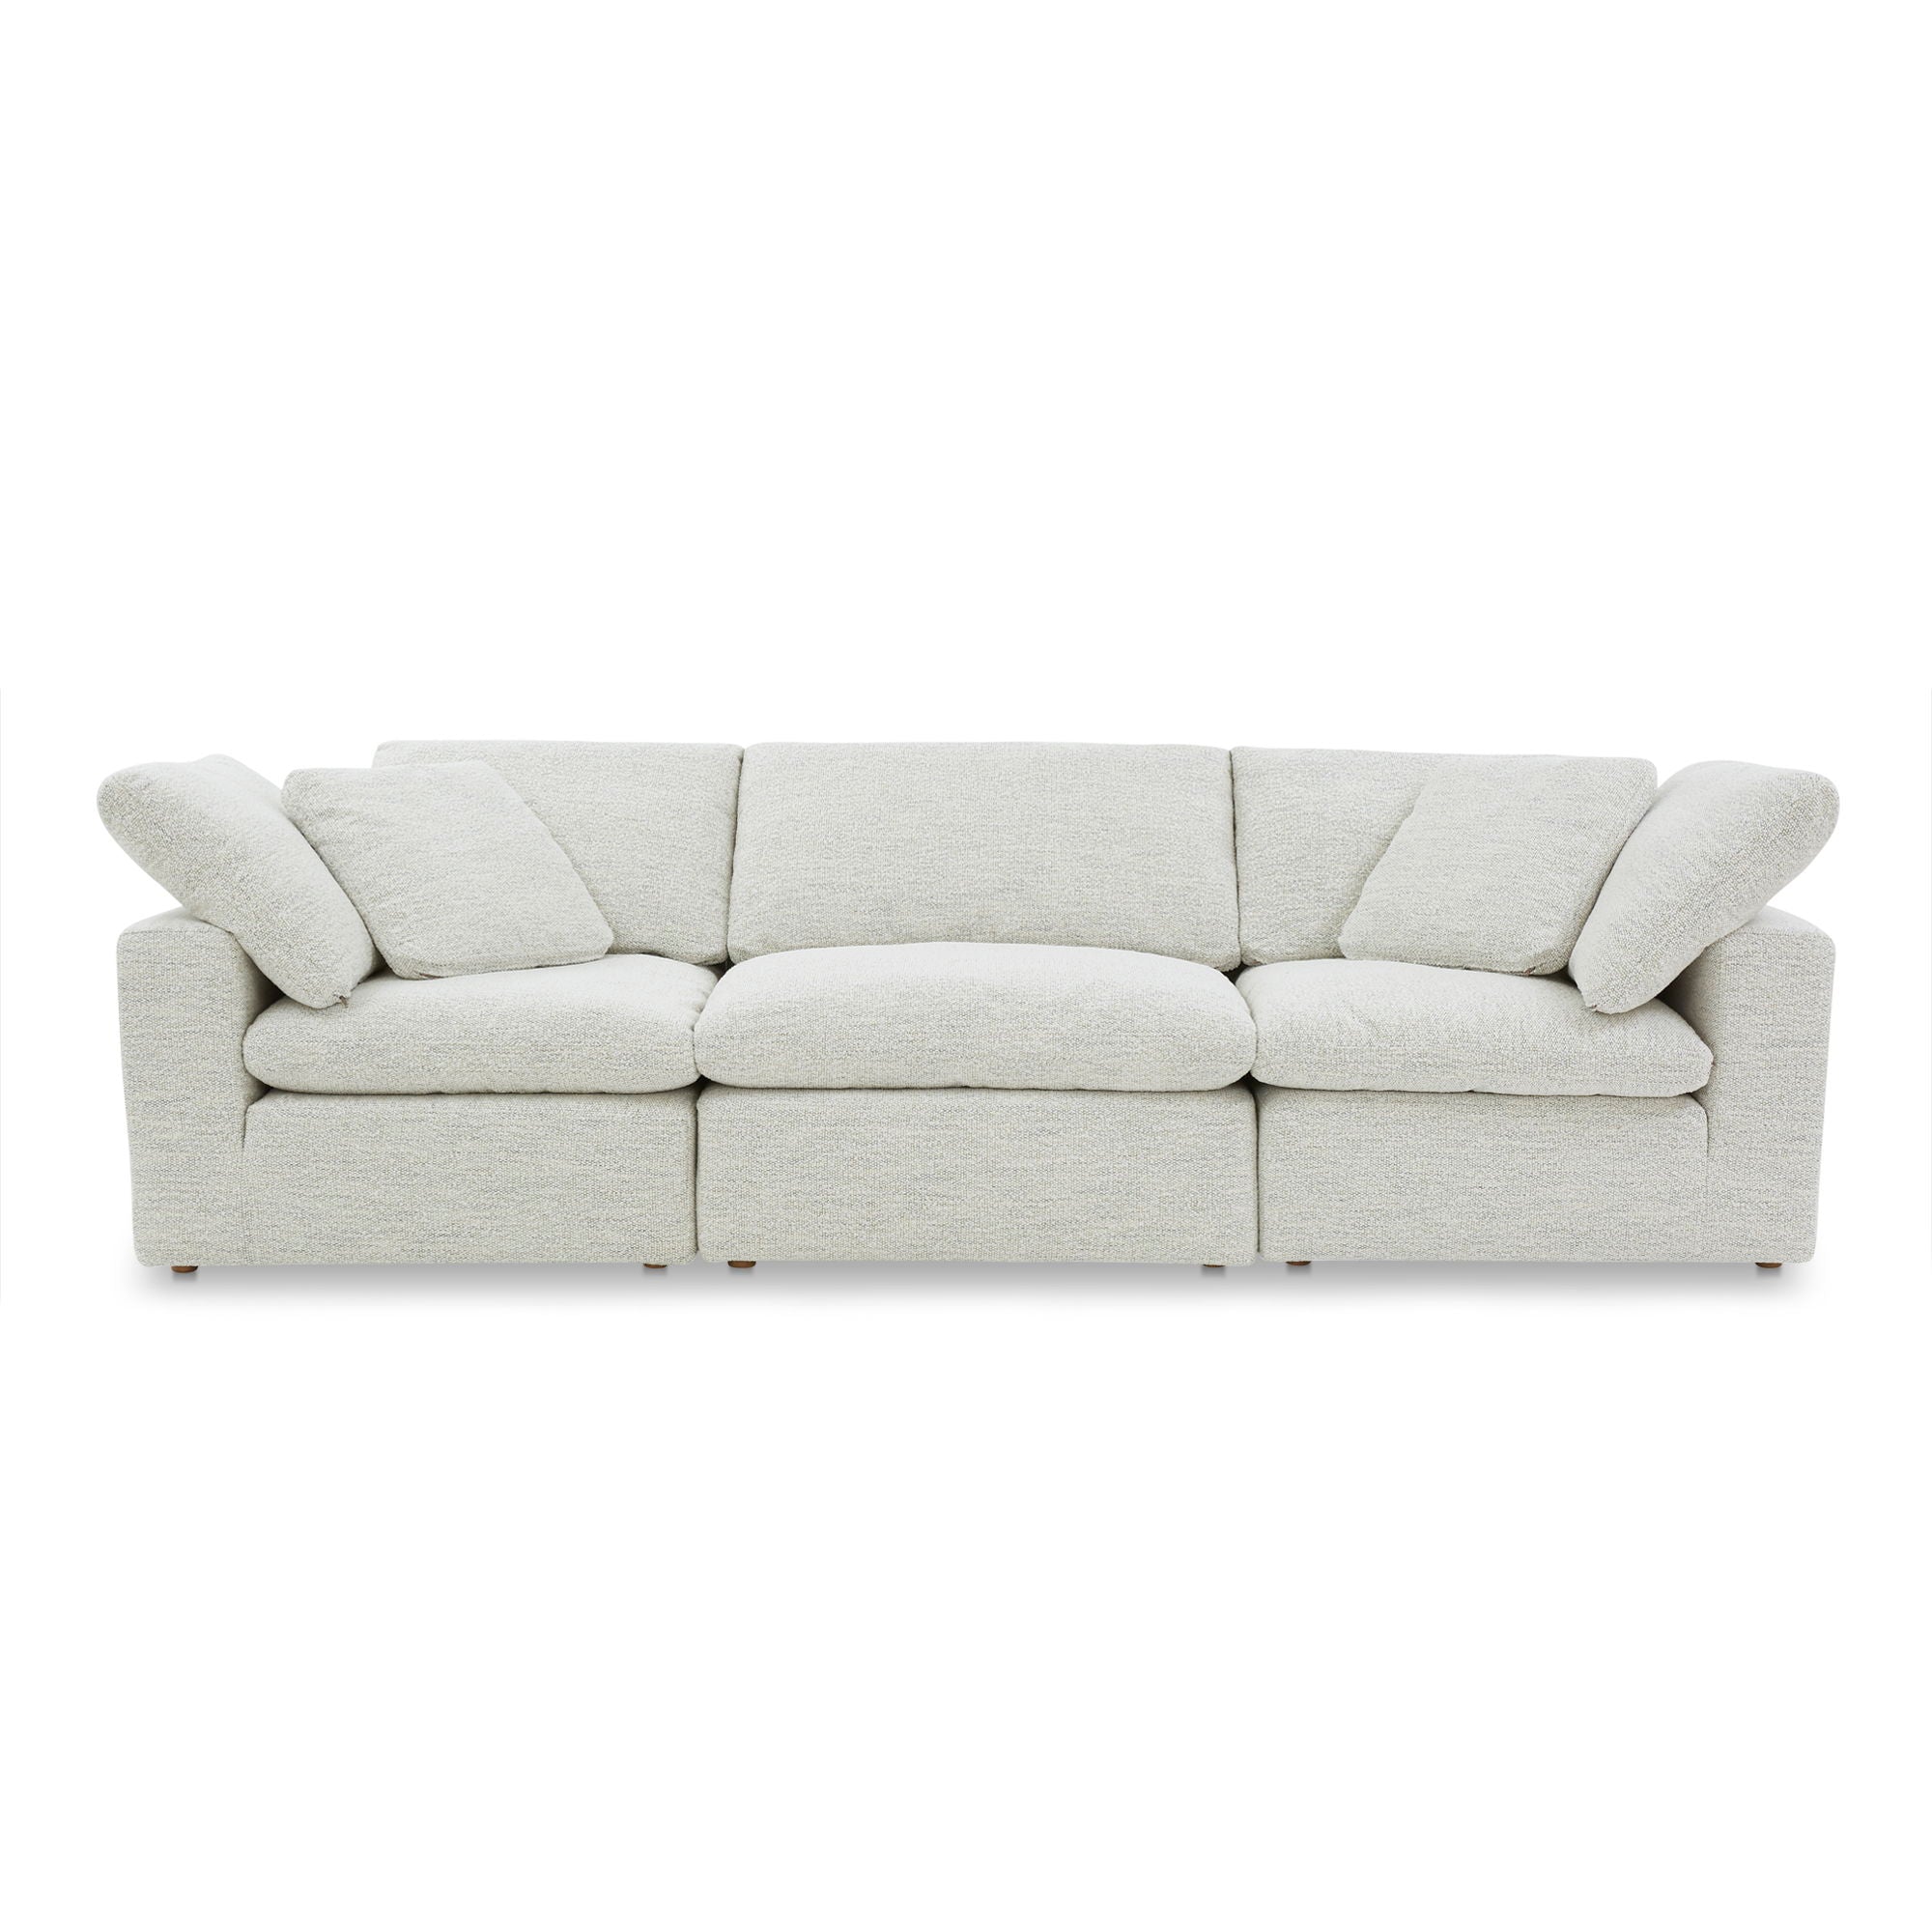 Terra - Modular Sofa Performance Fabric - Sand-Stationary Sectionals-American Furniture Outlet